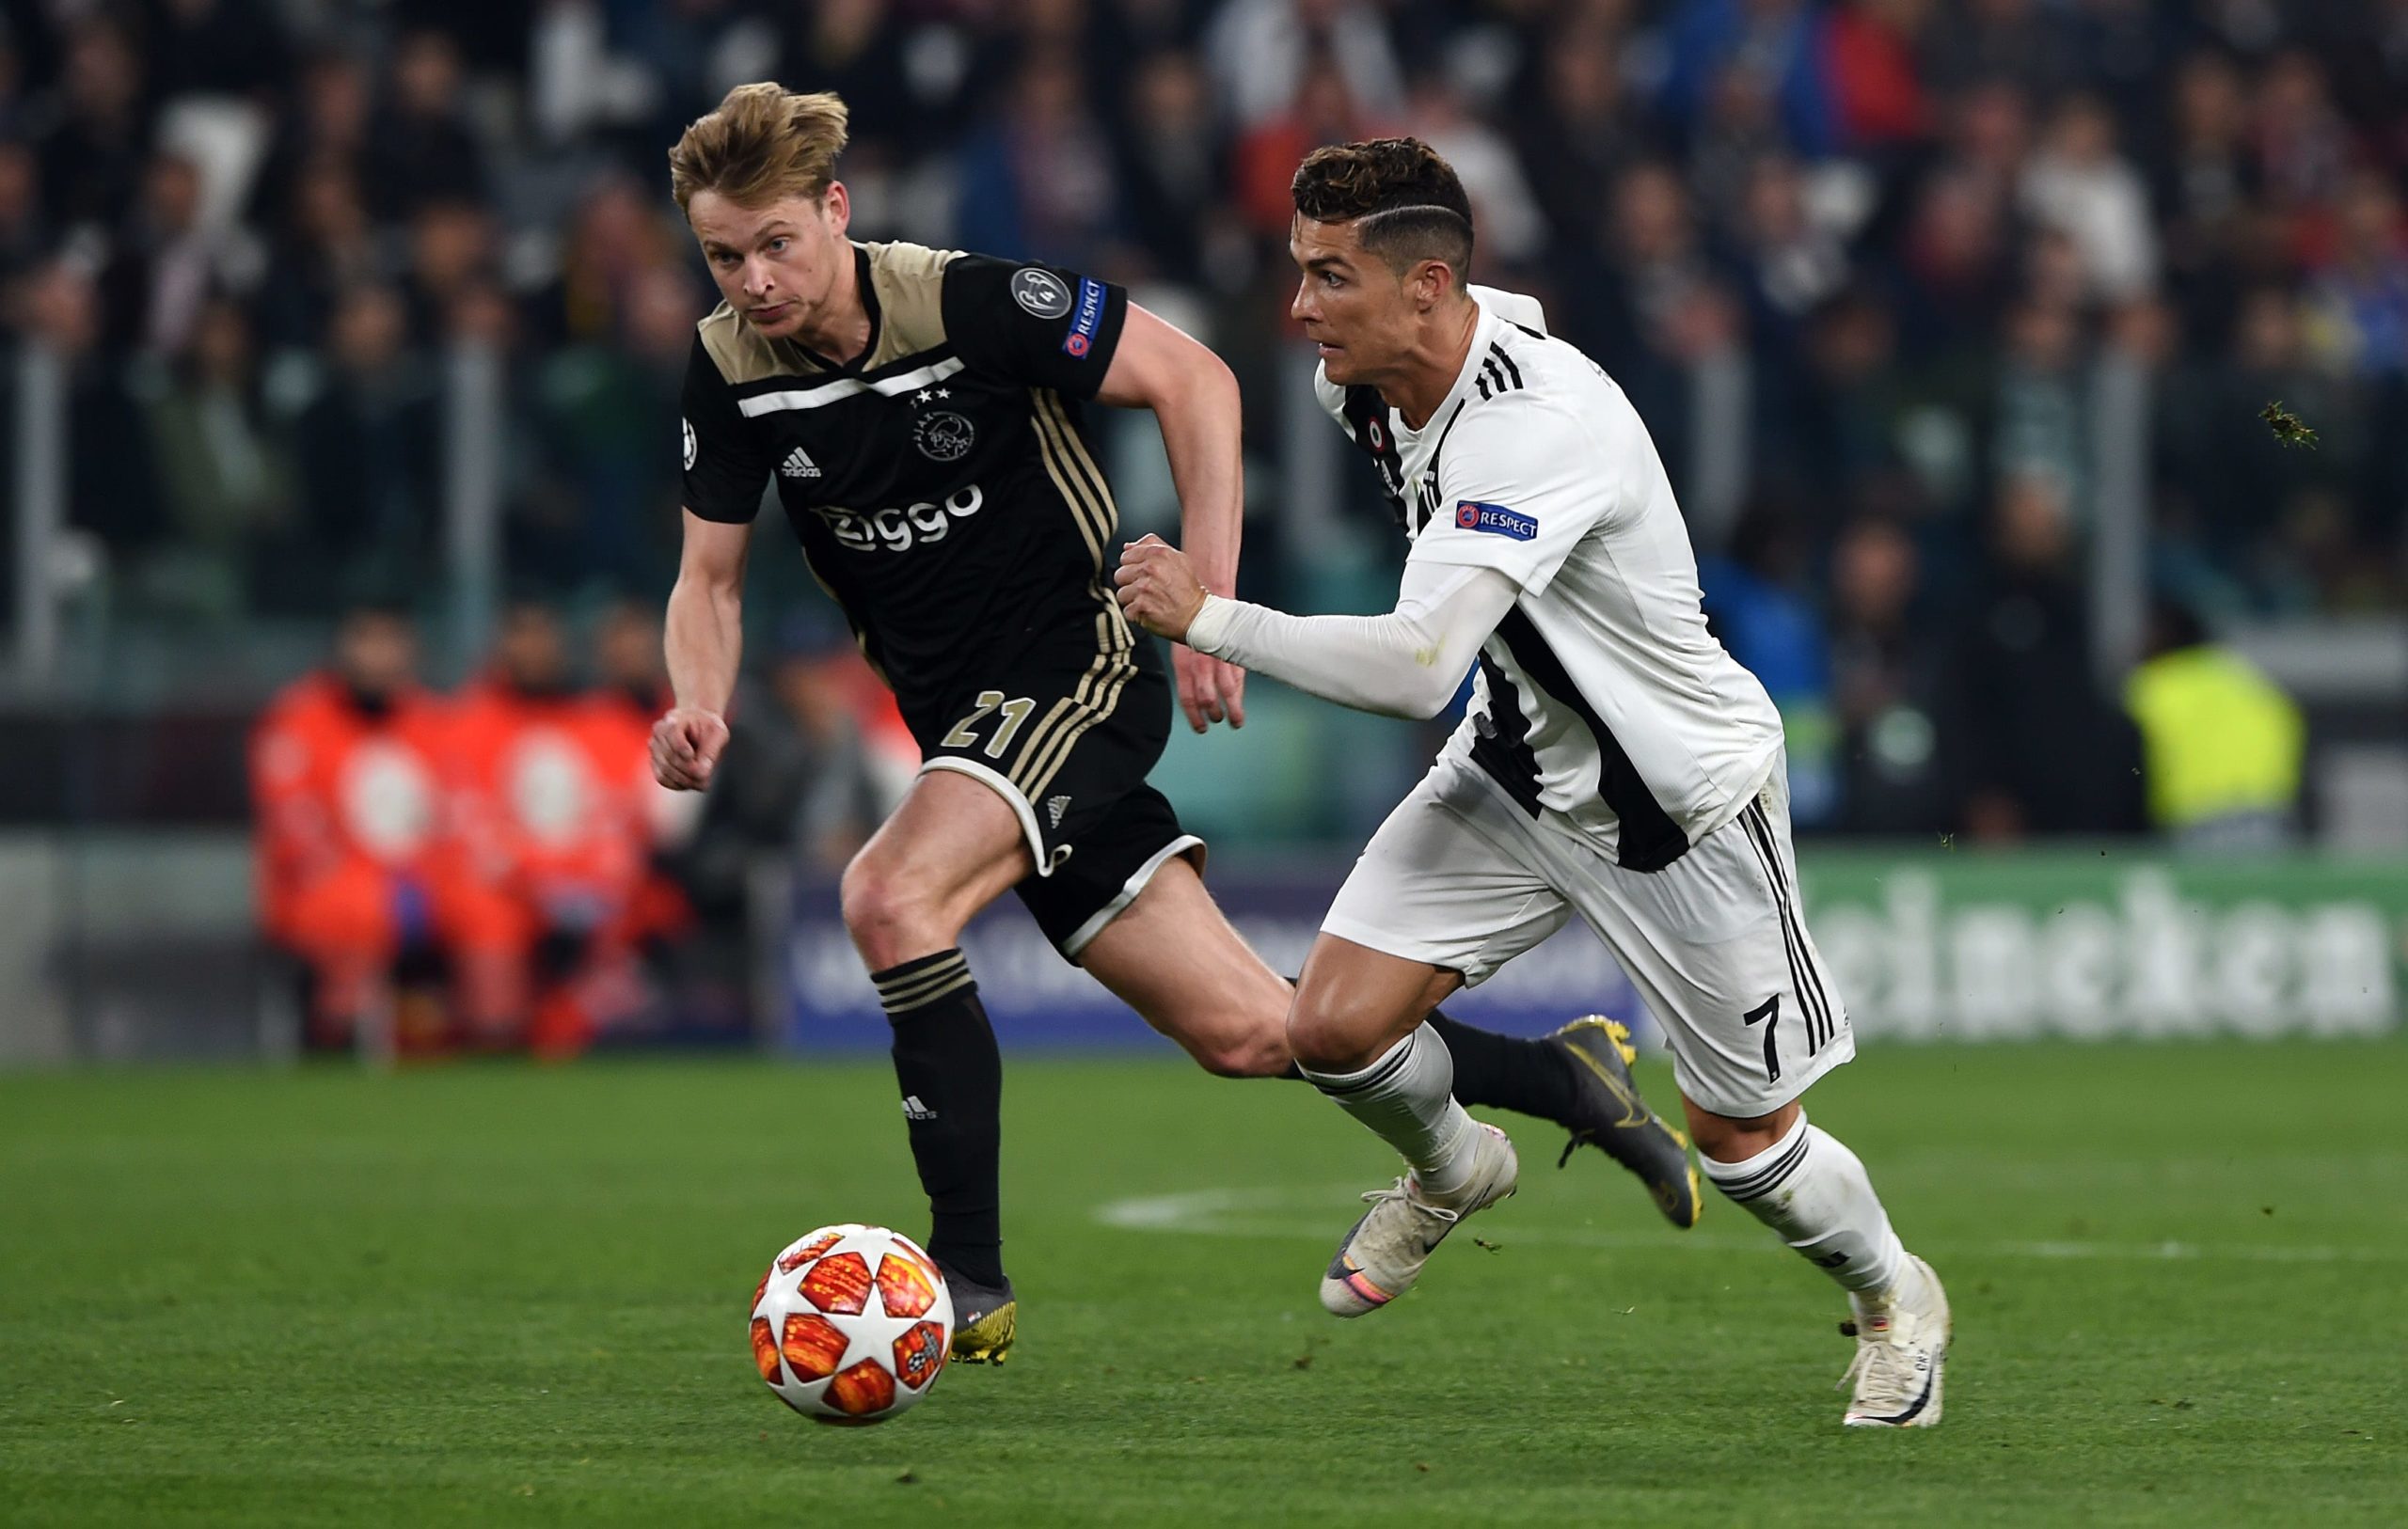 ViacomCBS reaches deal to stream UEFA Champions League matches